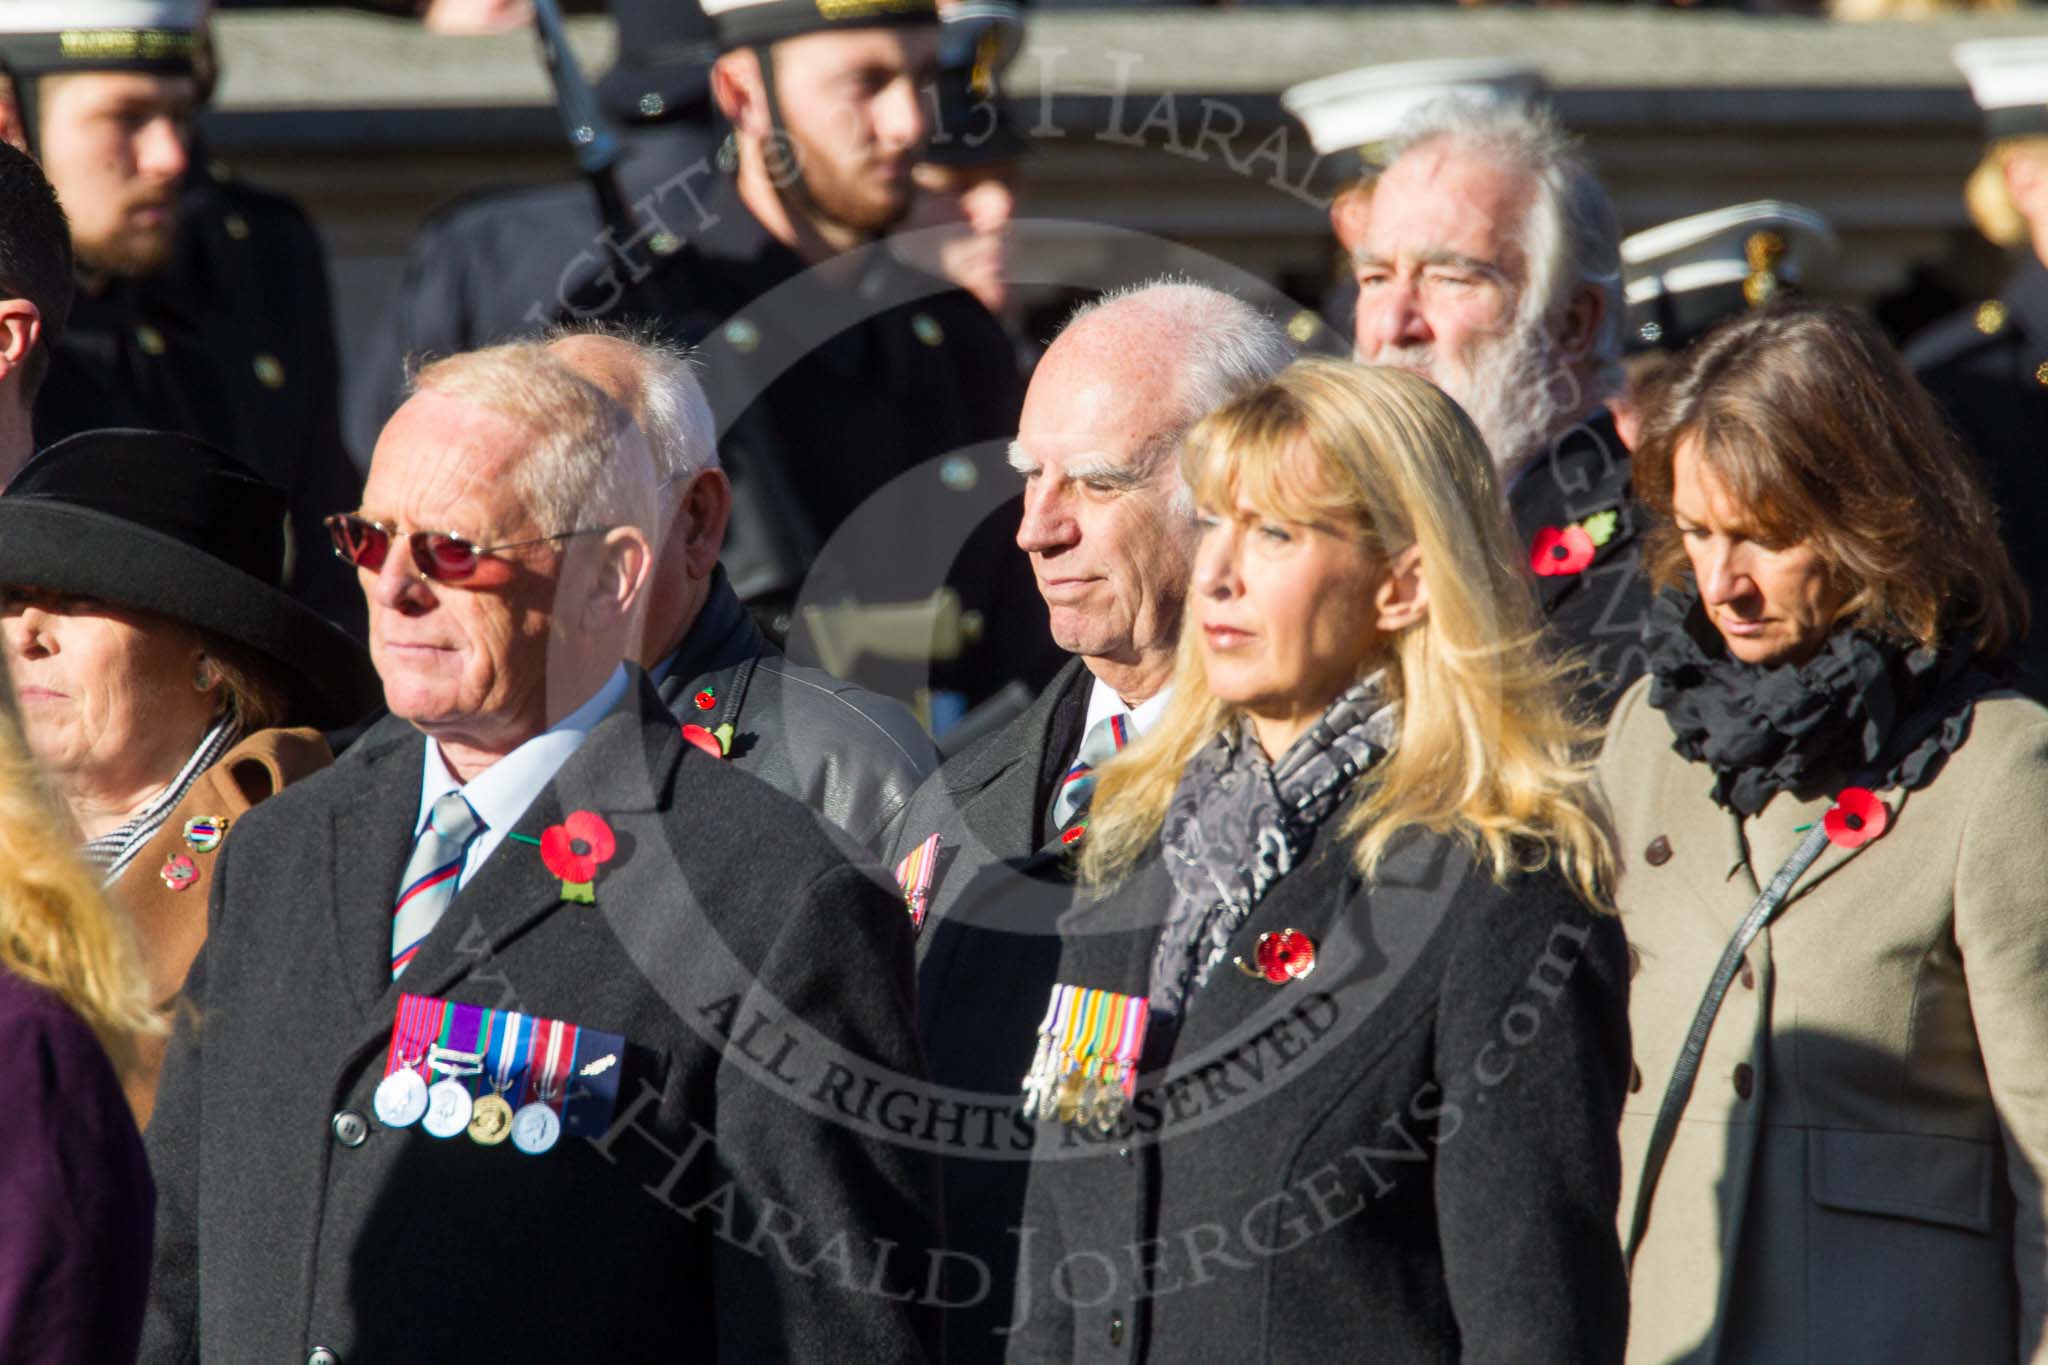 Remembrance Sunday at the Cenotaph in London 2014: Group F14 - National Malaya & Borneo Veterans Association.
Press stand opposite the Foreign Office building, Whitehall, London SW1,
London,
Greater London,
United Kingdom,
on 09 November 2014 at 11:57, image #1007